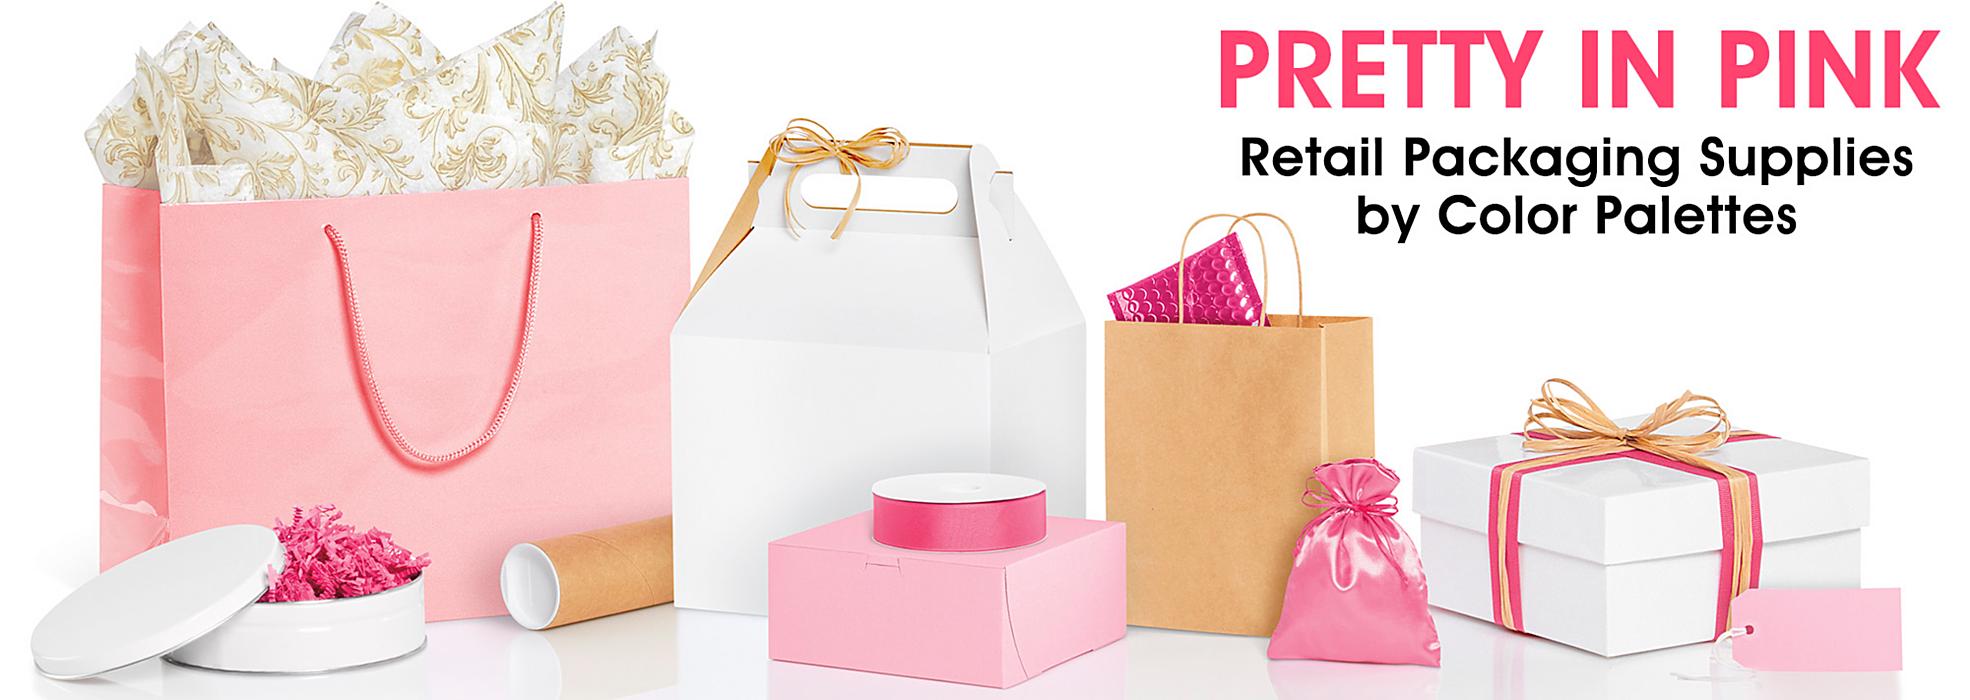 Pretty In Pink - Retail Packaging Supplies by Color Palettes